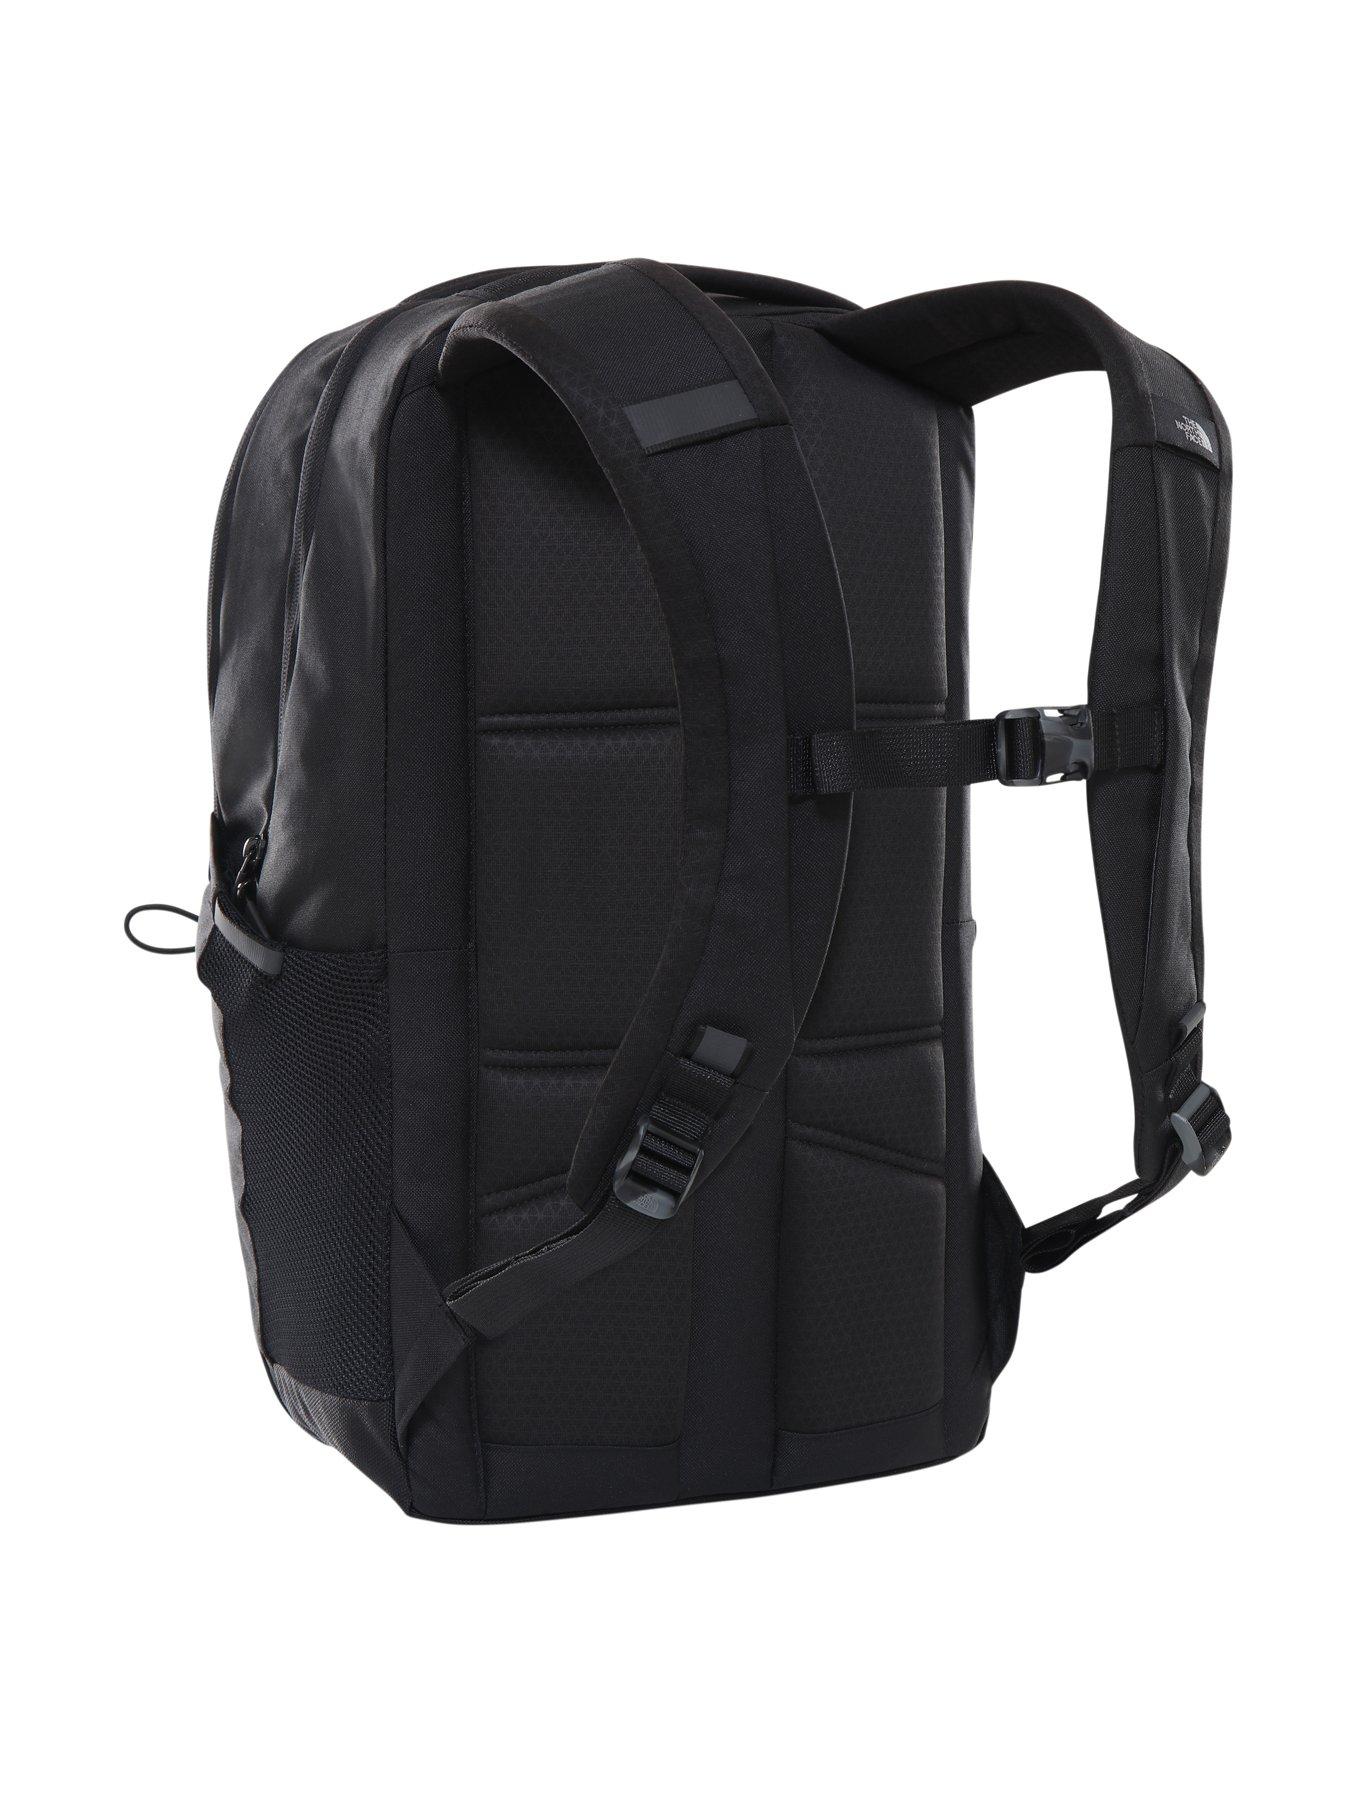 THE NORTH FACE Men's Jester Backpack - Black | Very.co.uk